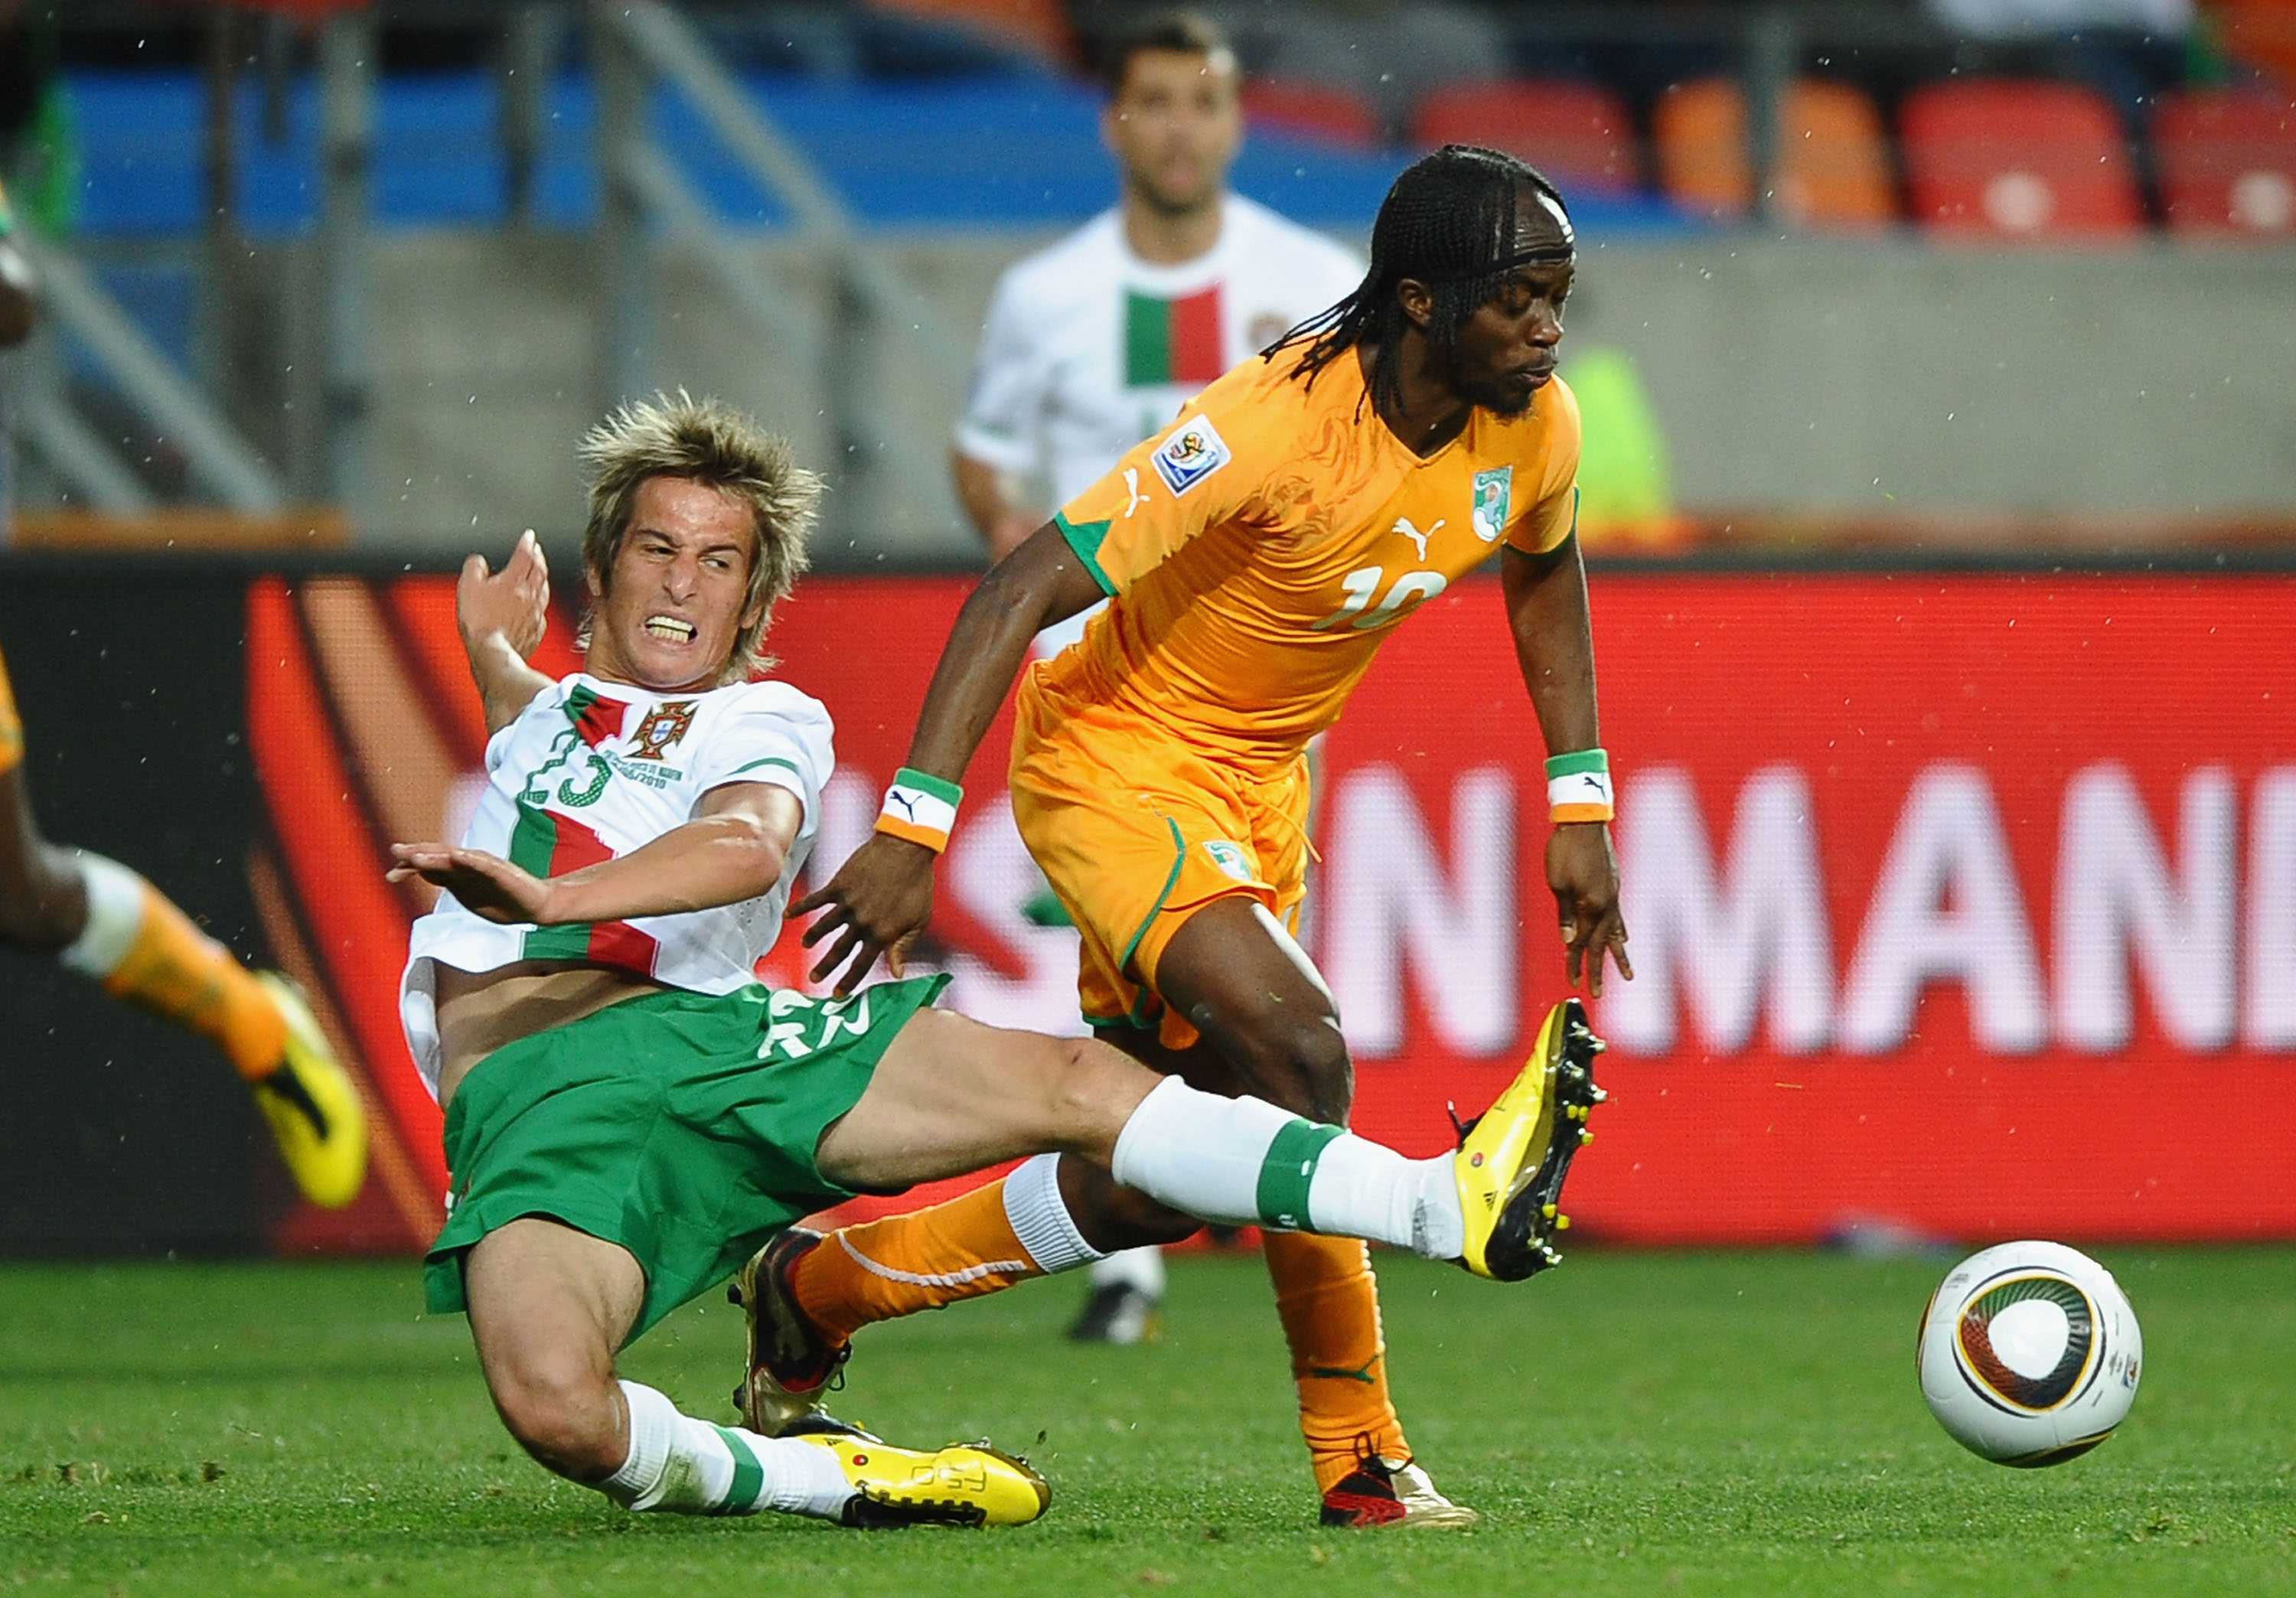 PORT ELIZABETH, SOUTH AFRICA - JUNE 15:  Gervinho of Ivory Coast is tackled by Fabio Coentrao of Portugal during the 2010 FIFA World Cup South Africa Group G match between Ivory Coast and Portugal at Nelson Mandela Bay Stadium on June 15, 2010 in Port Eli